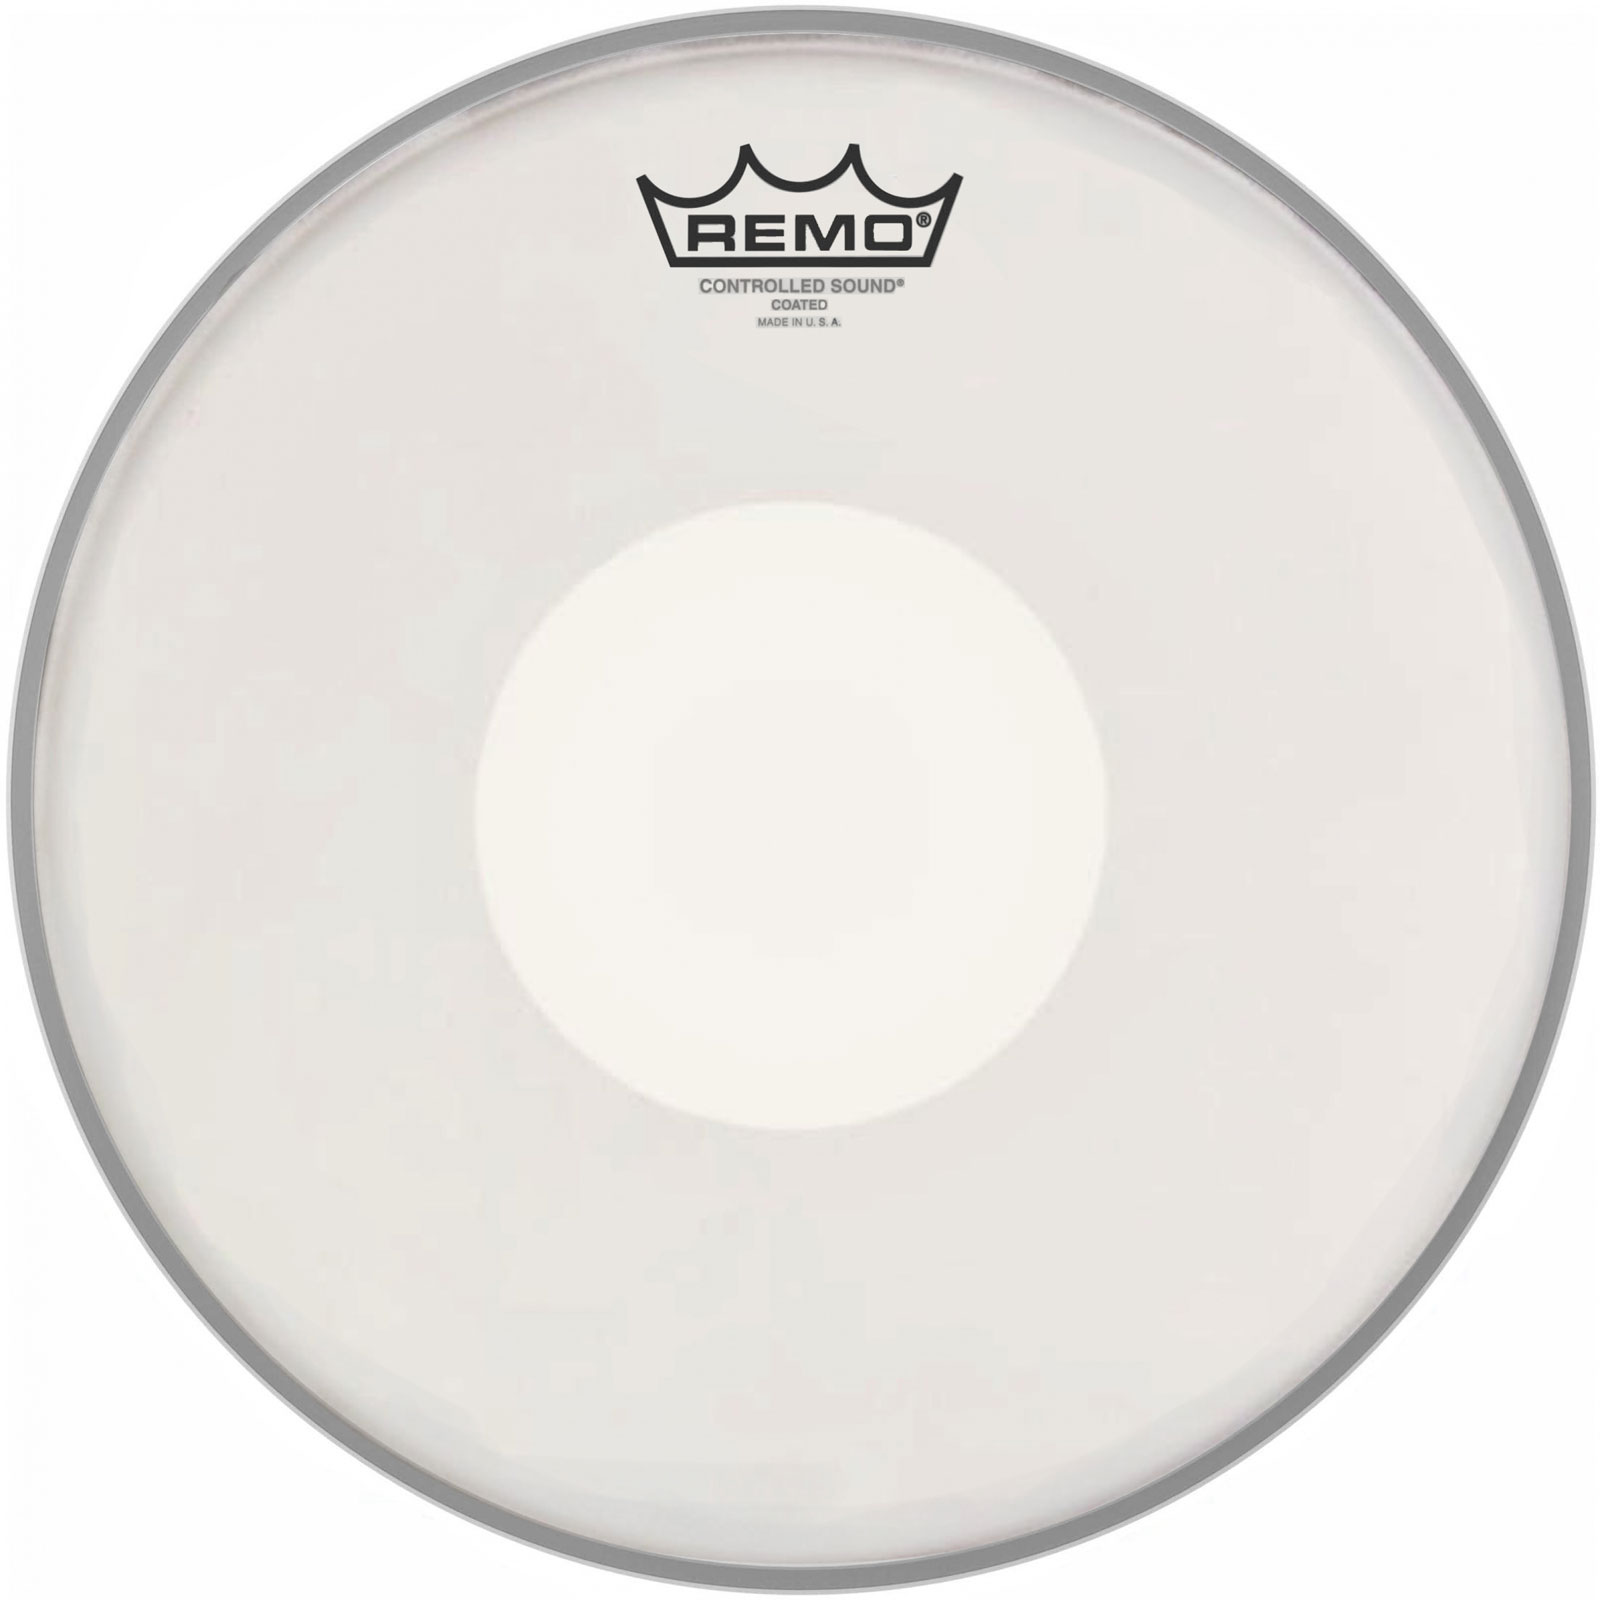 REMO CS-0113-00 CONTROLLED SOUND SABLEE ROND BLANC 13